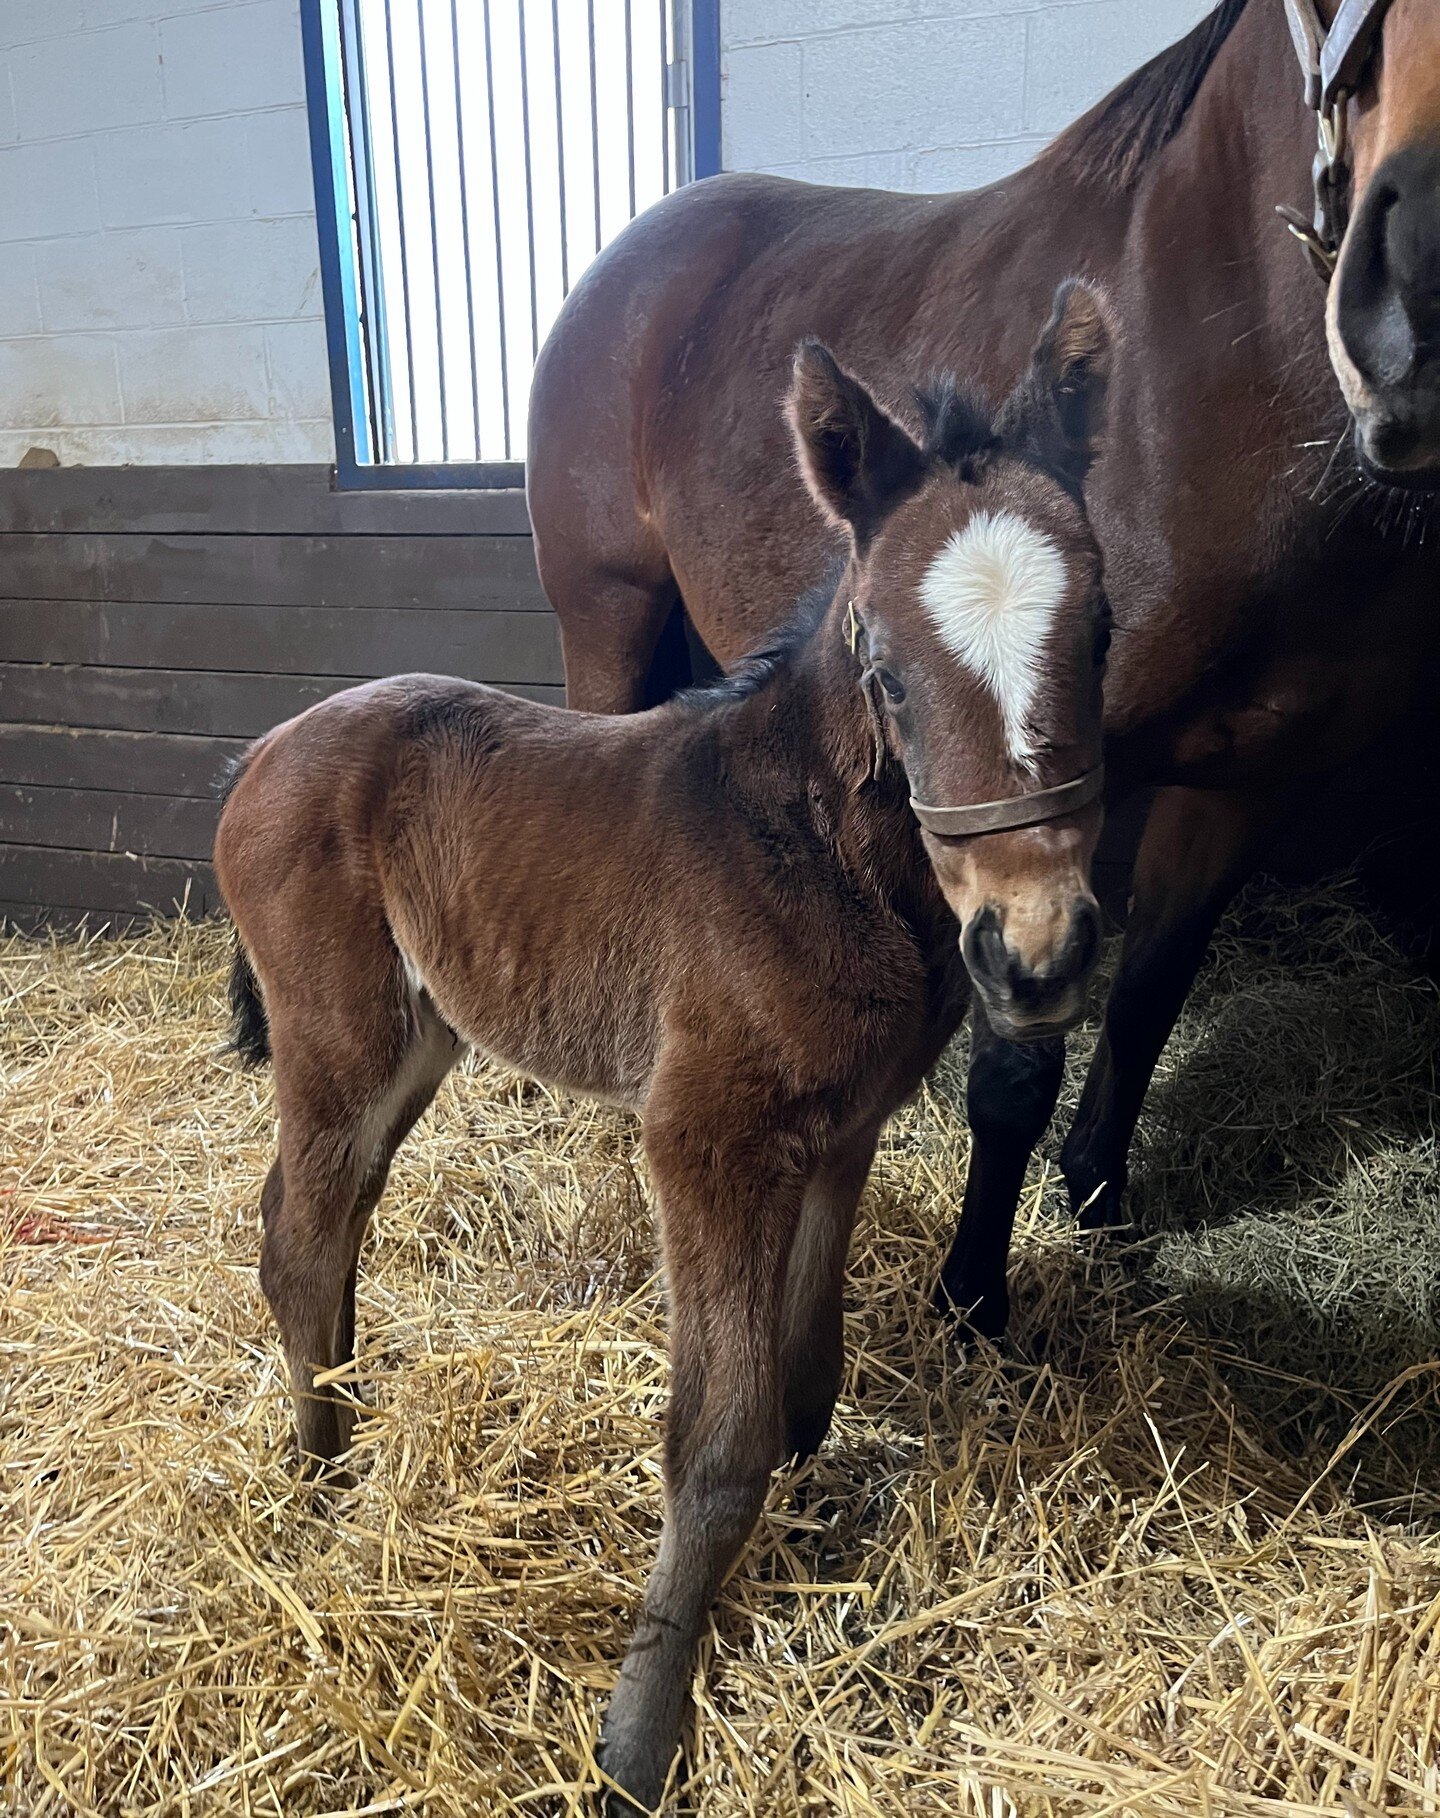 Our second foal of the 2024 season arrived last night! A filly by Runhappy

Runhappy/Savour the Moment 24' Filly
Born 1/17/24